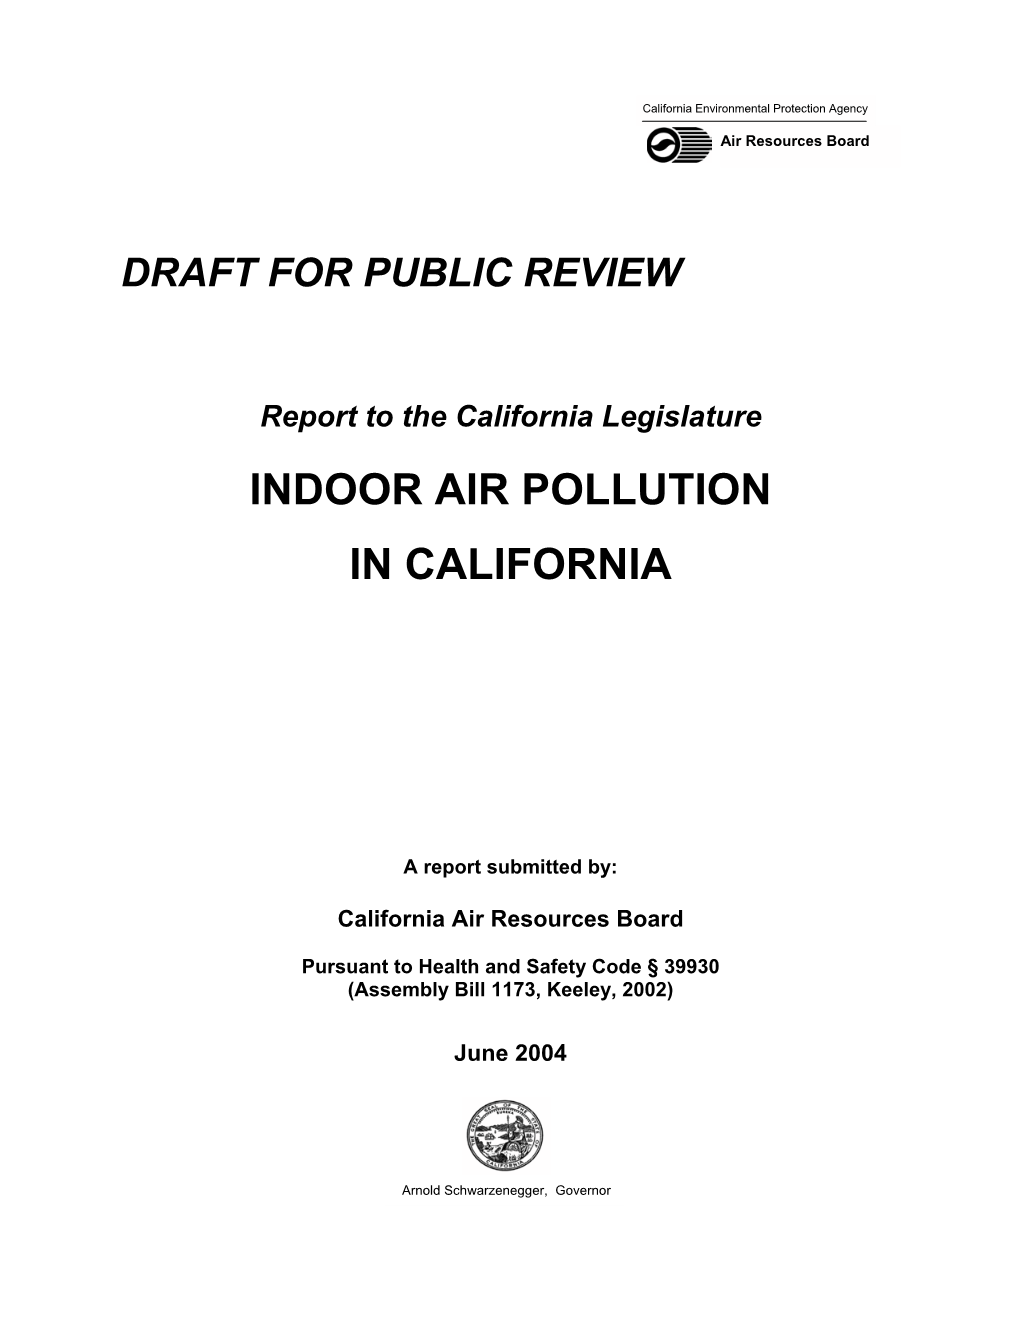 Draft Report on Indoor Air Pollution in California